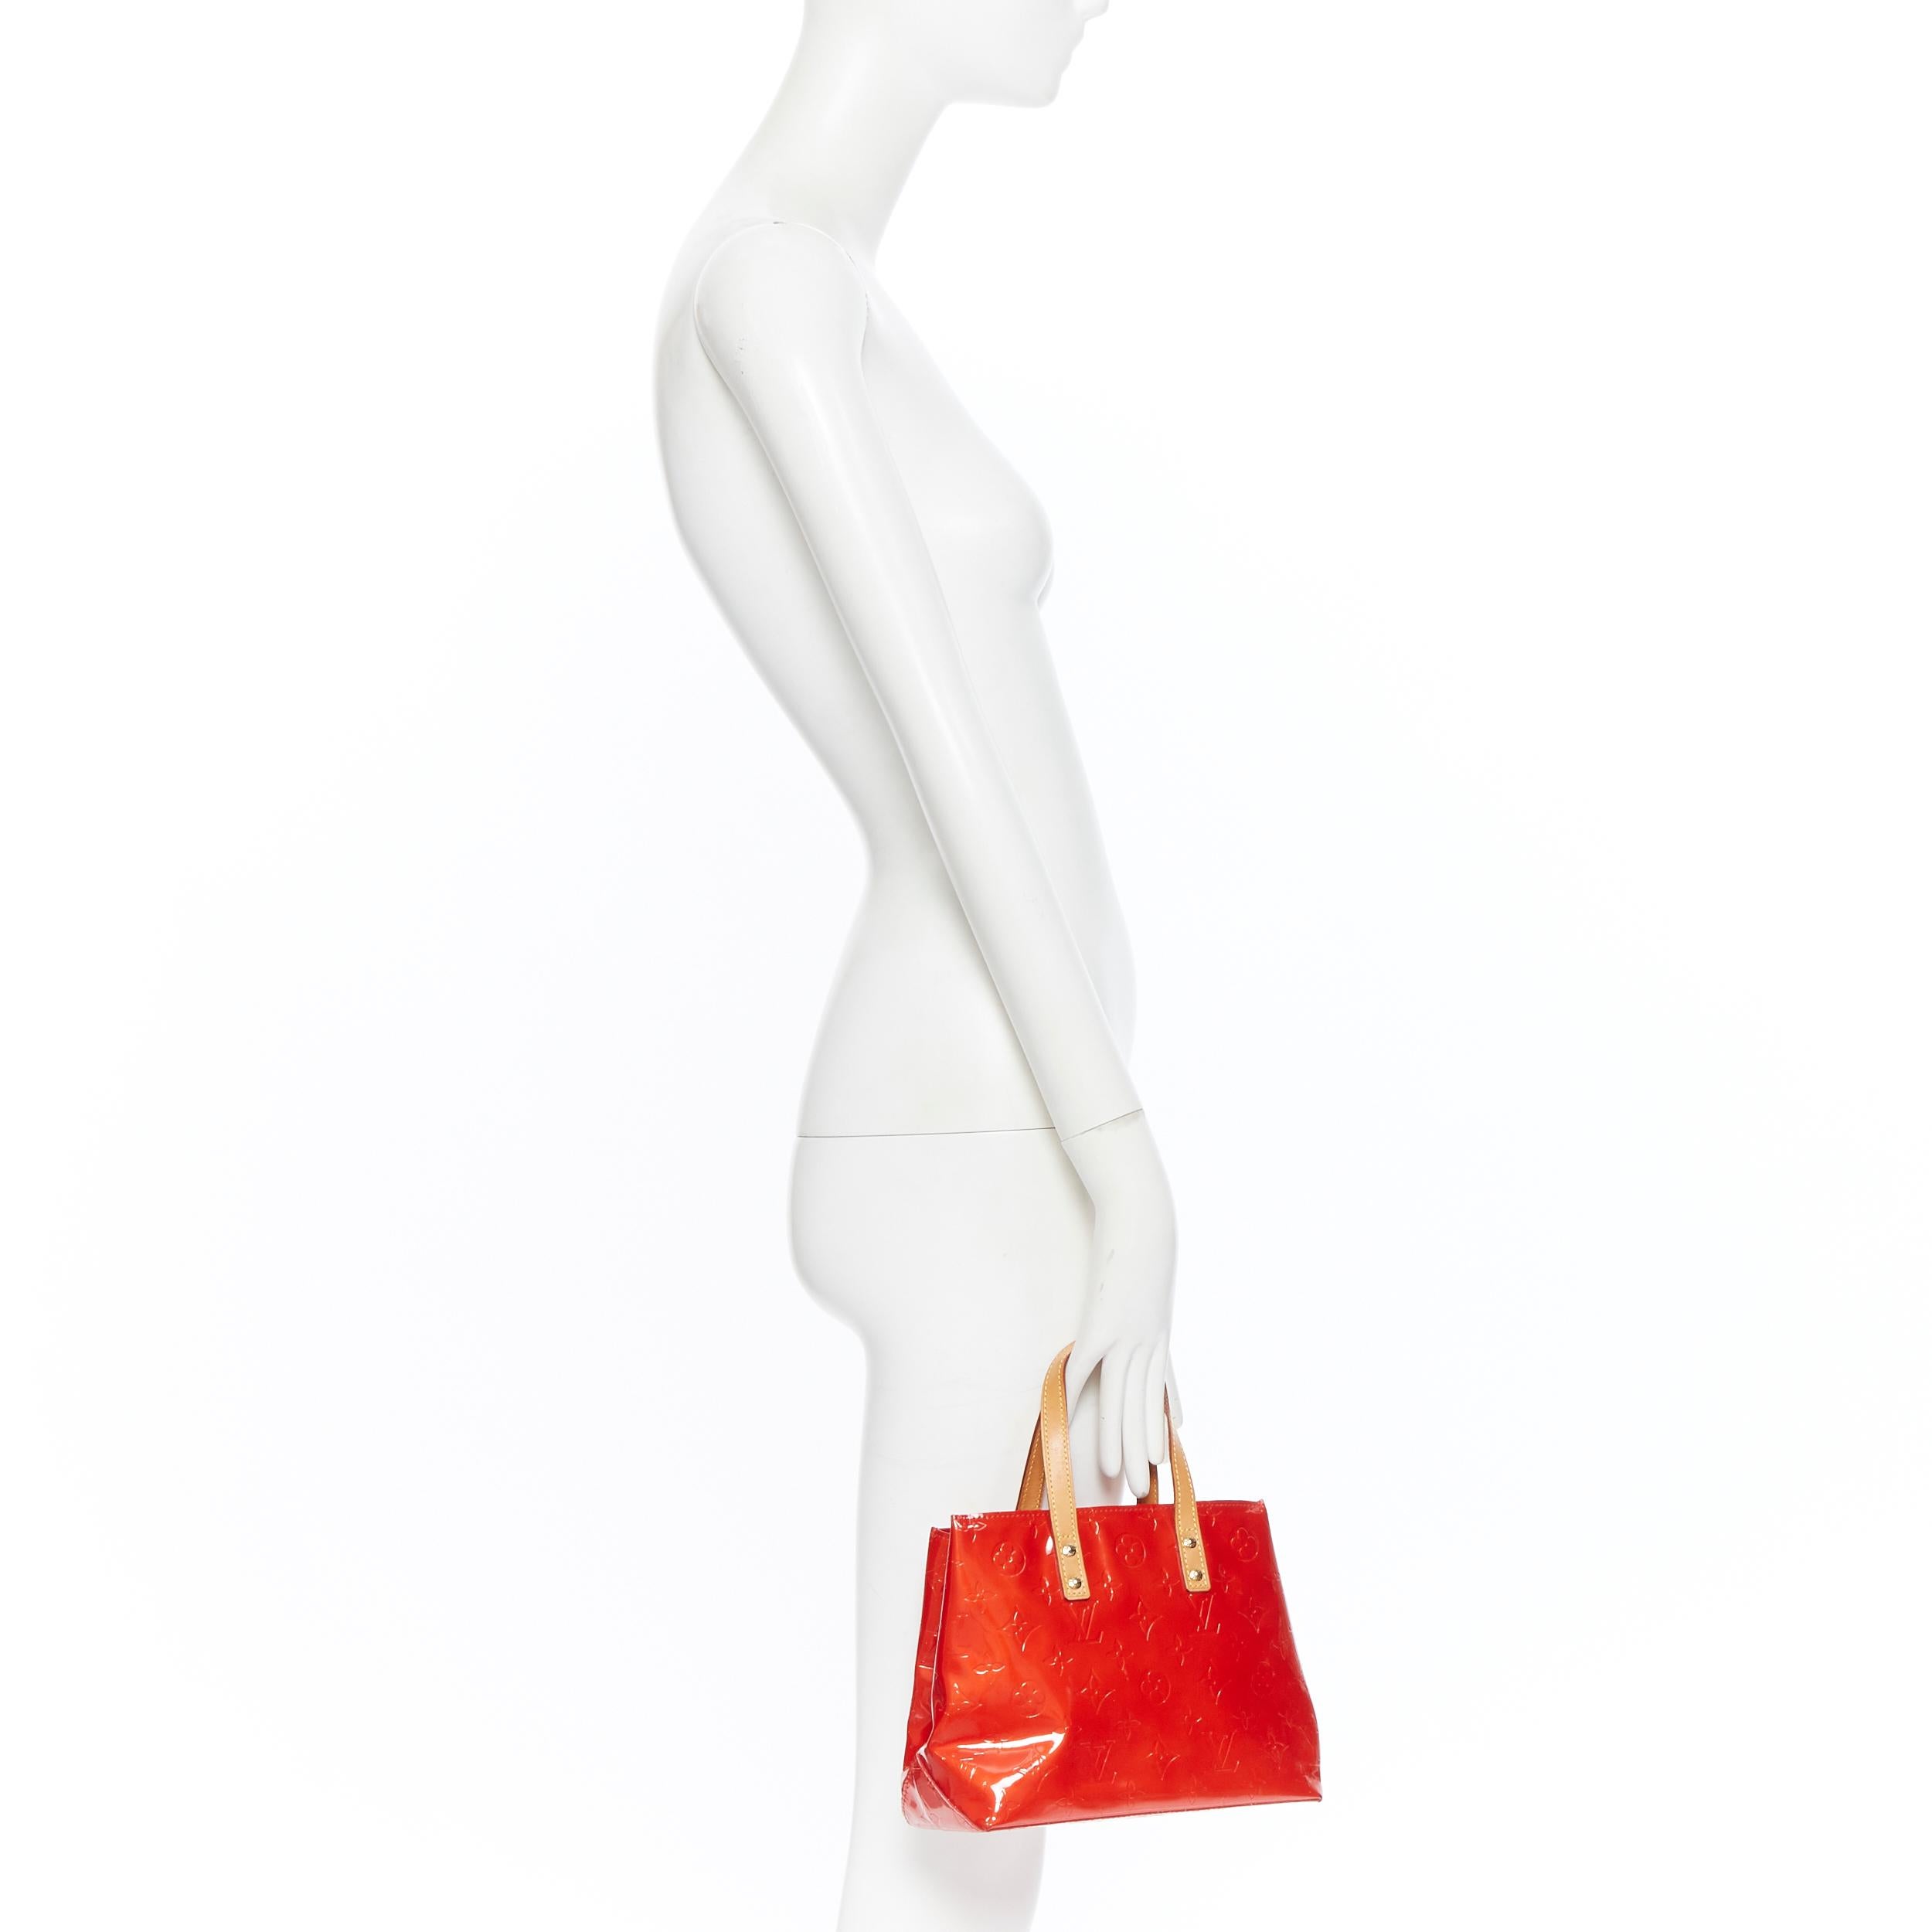 LOUIS VUITTON Lead PM Vernis red monogram embossed small satchel tote bag
Brand: Louis Vuitton
Designer: Marc Jacobs
Model Name / Style: Lead PM
Material: Patent leather
Color: Red
Pattern: Solid
Extra Detail: Double Handles.
Made in: